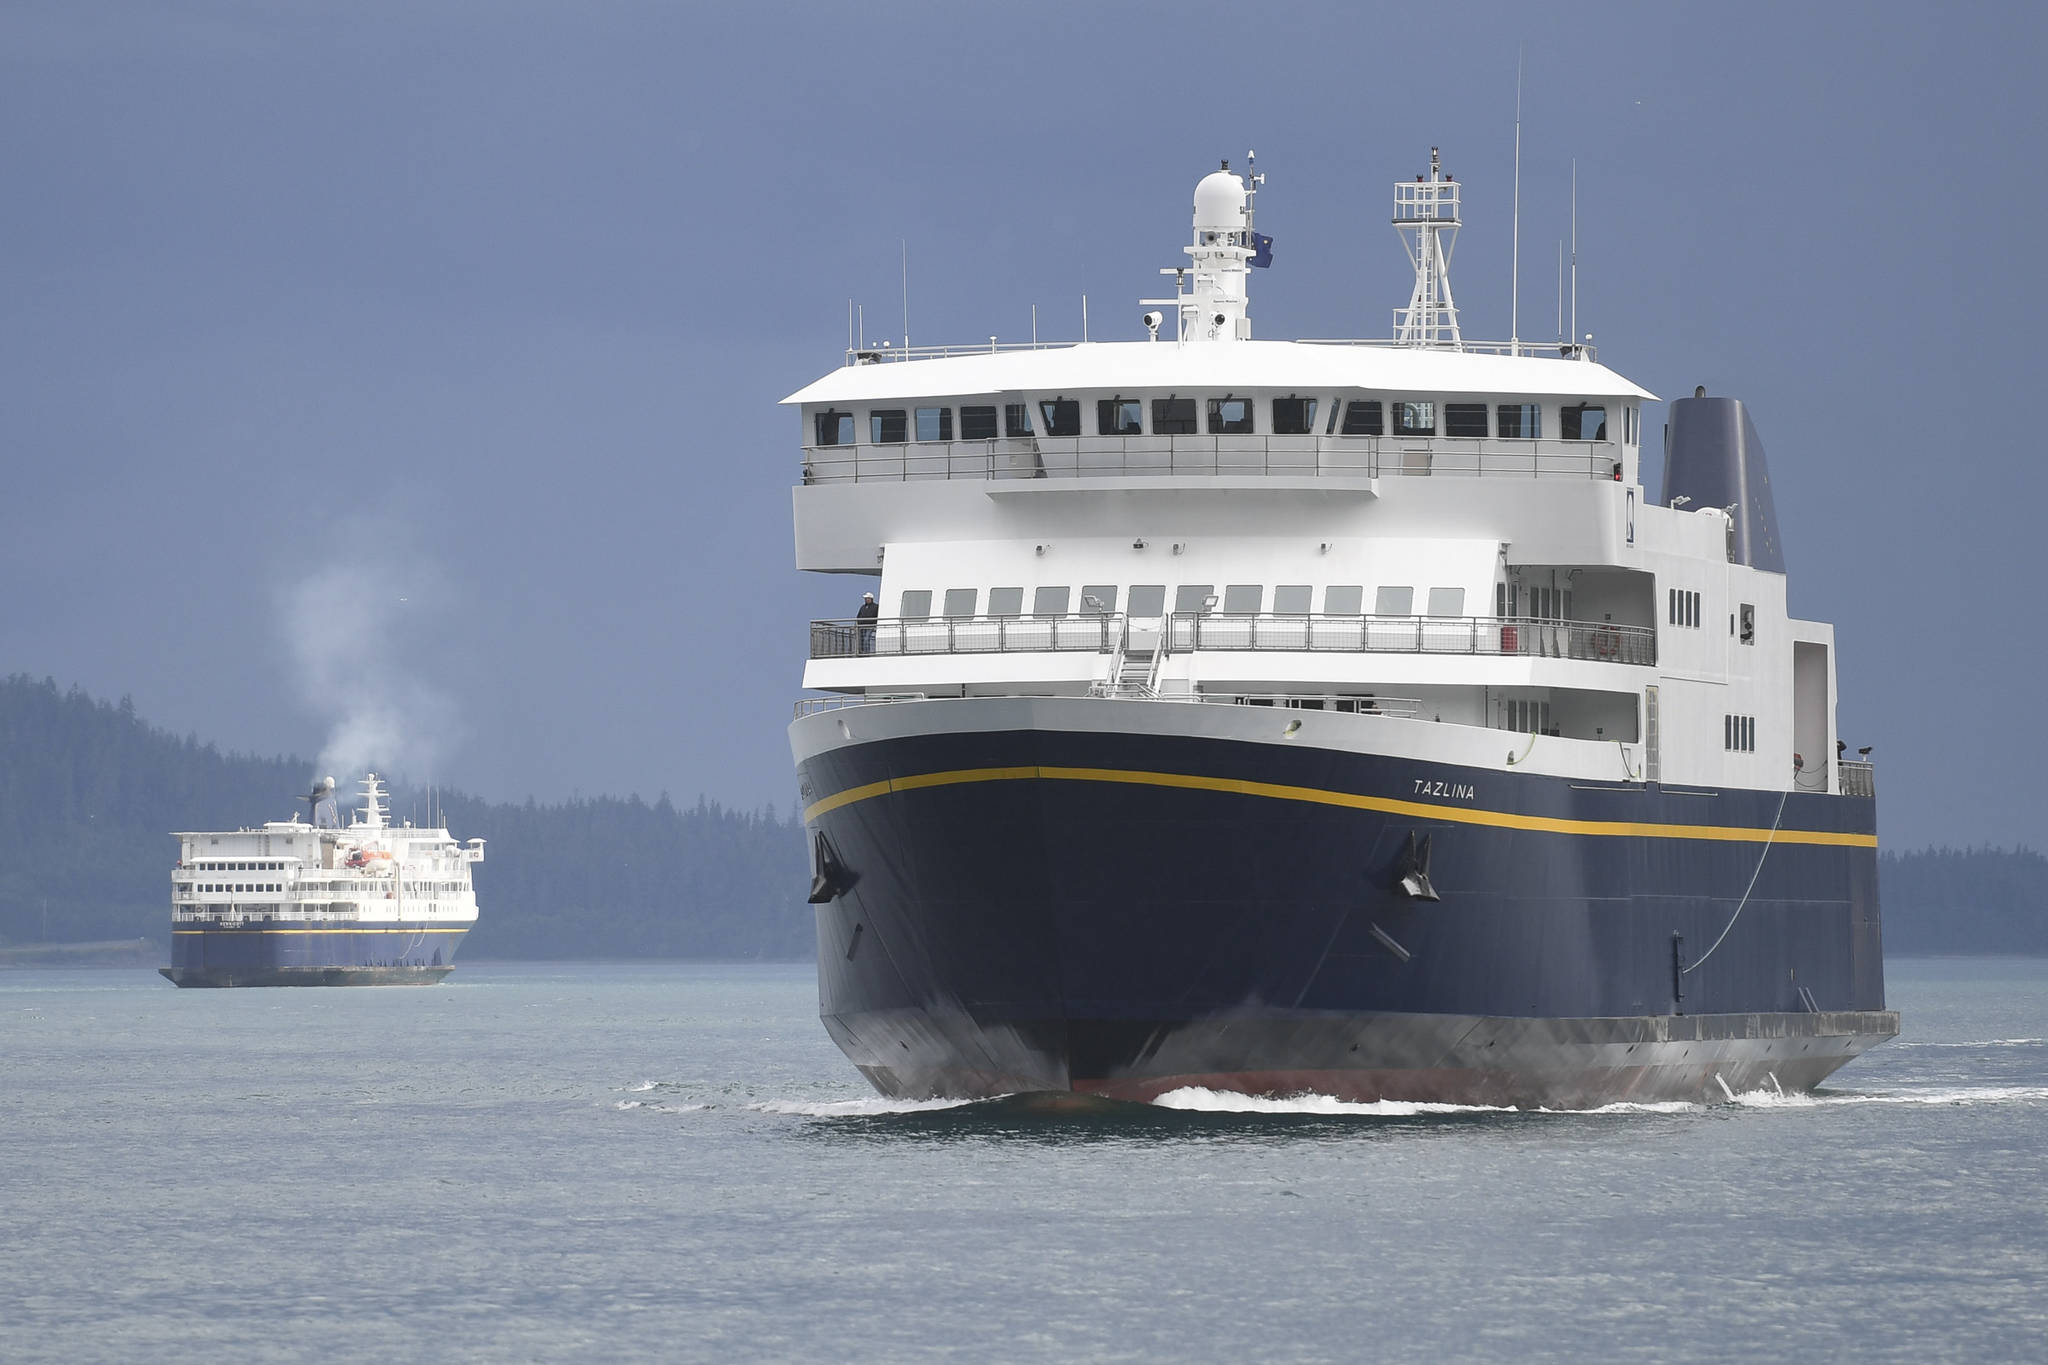 Temporary service to Prince Rupert resumes, but uncertainty remains